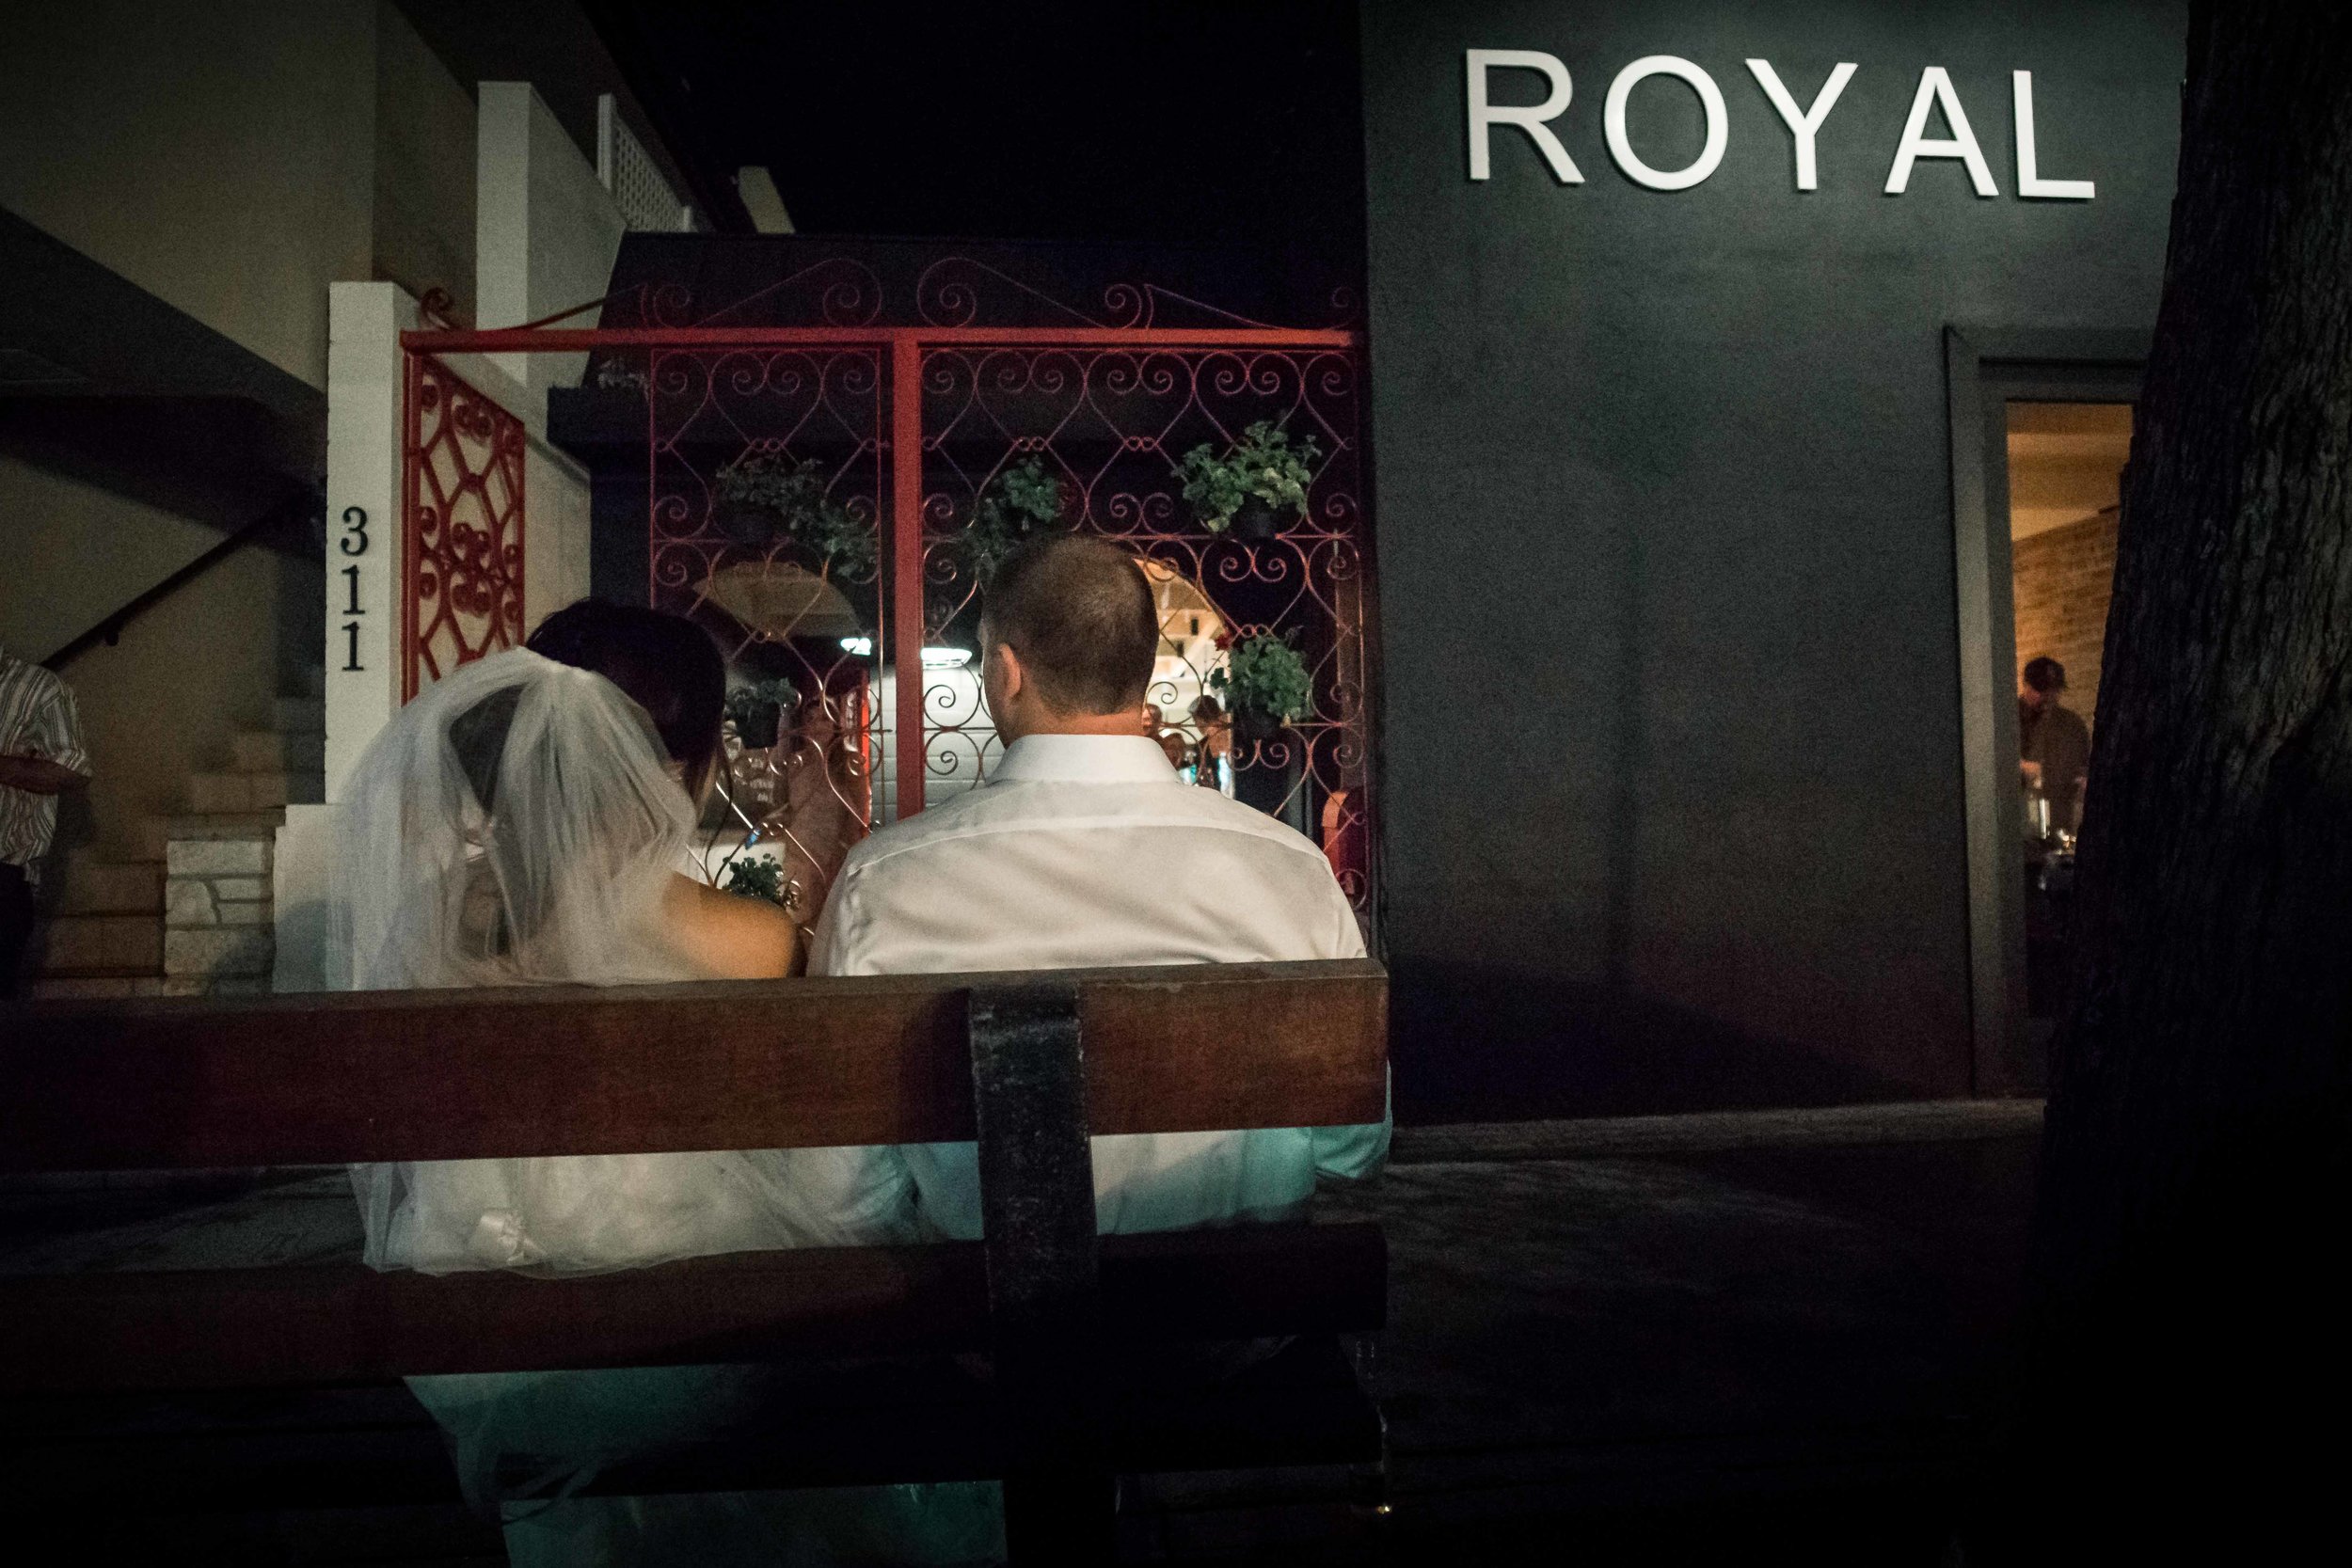 The bride and groom sitting outside of the Royal hand restaurant on Balboa Island